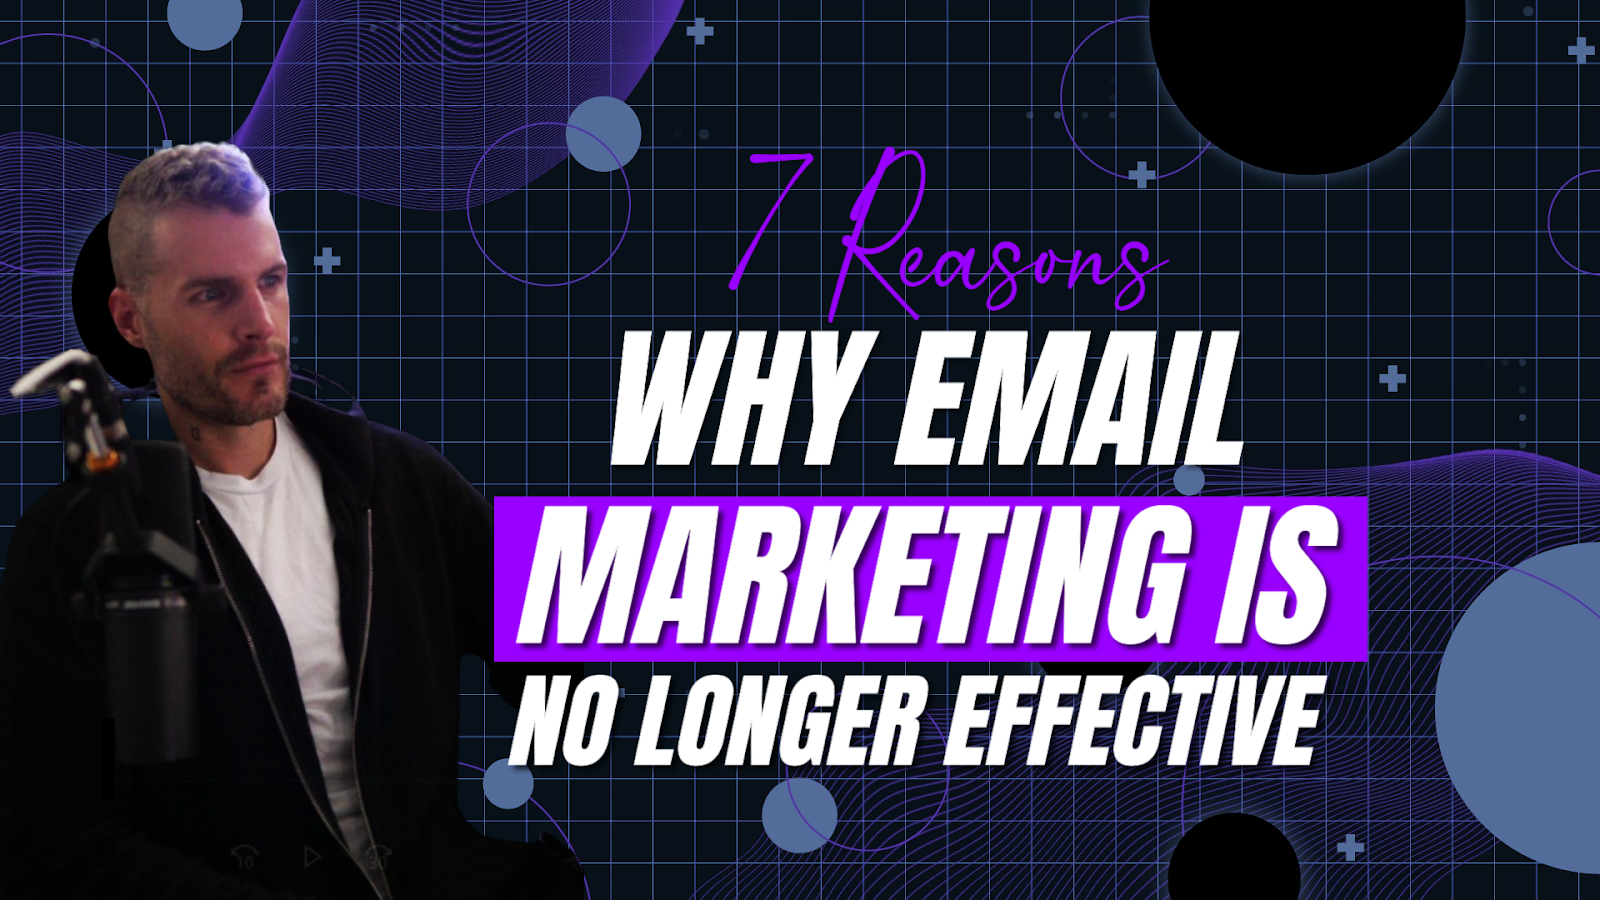 7 Reasons Why Email Marketing is No Longer Effective